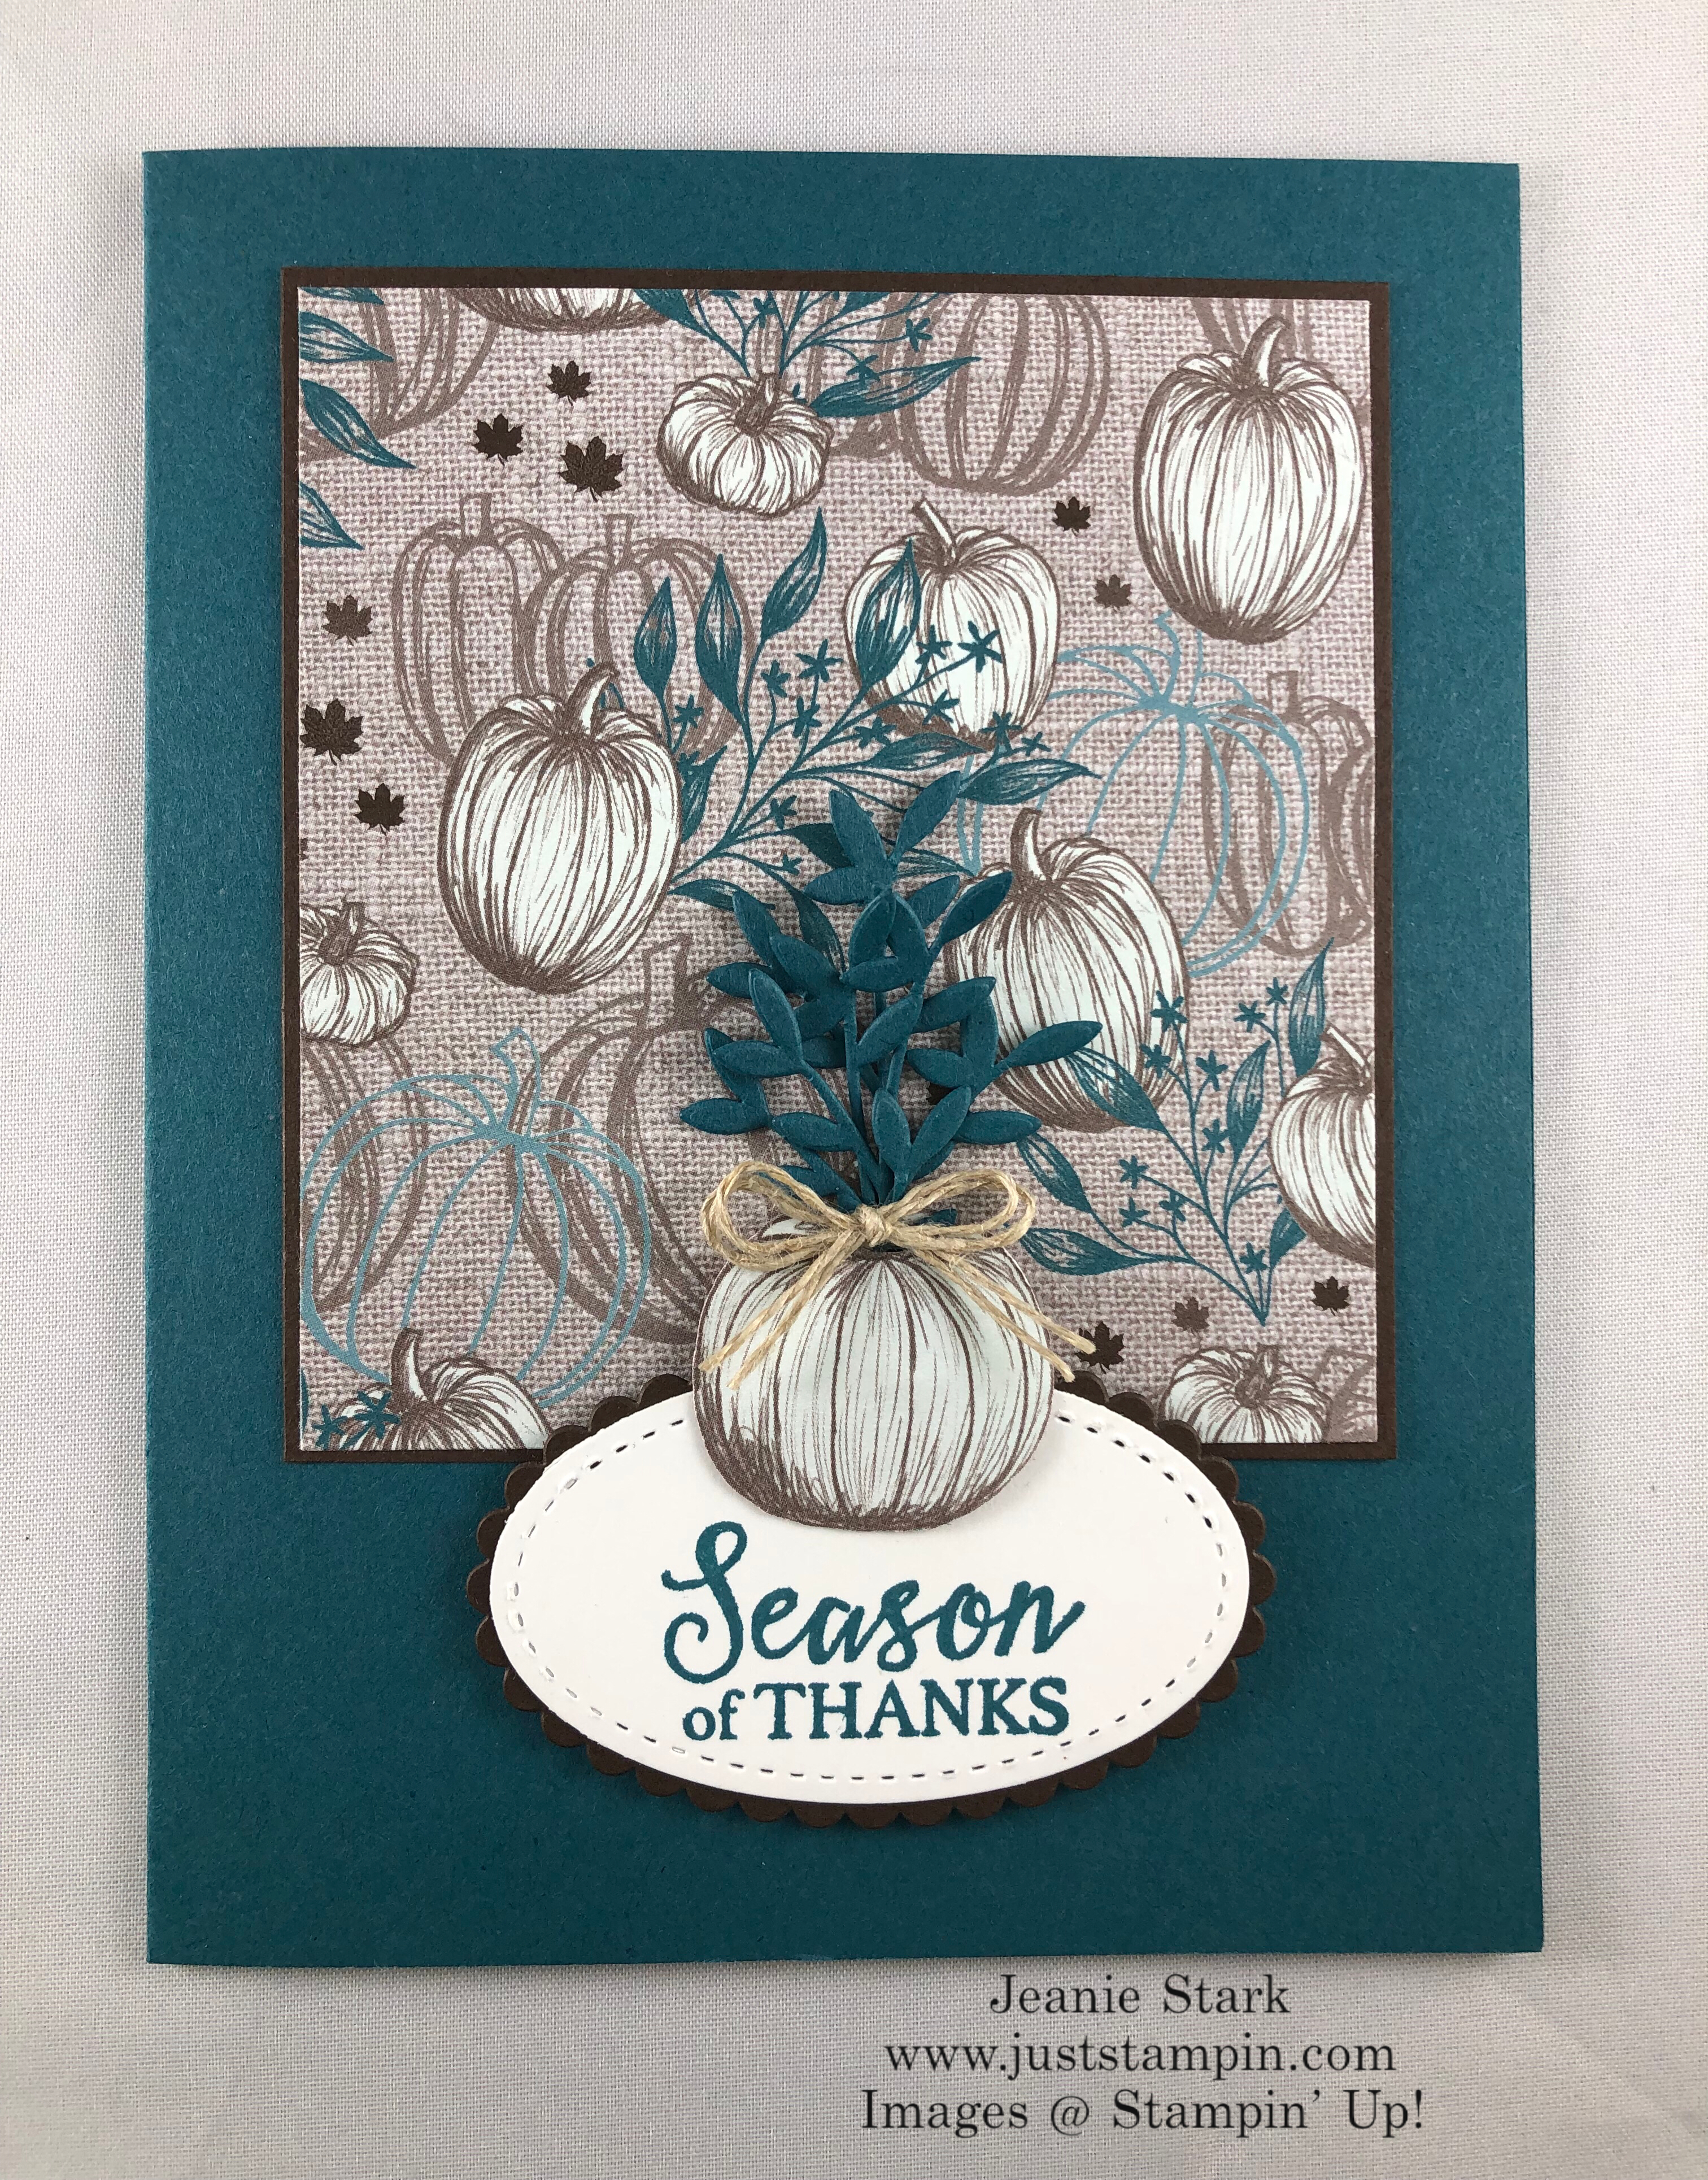 Stampin' Up! Gather Together Clean & Simple Thanksgiving or Thank You card idea - Jeanie Stark StampinUp